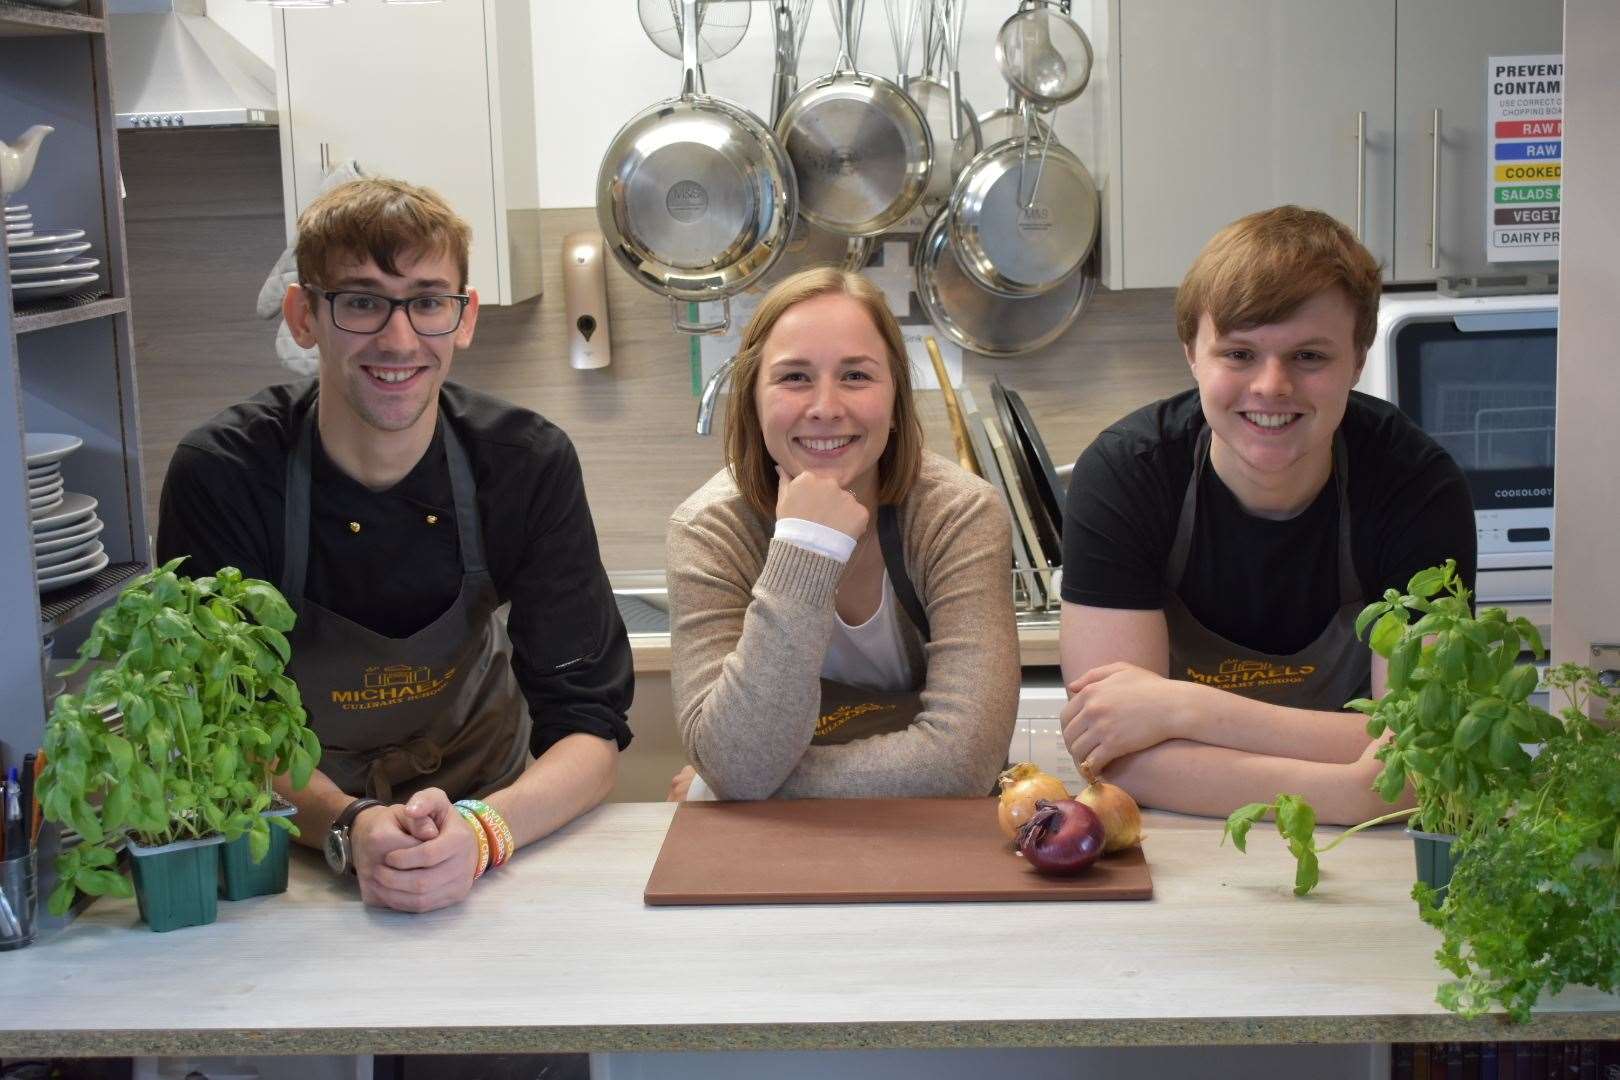 Michaels Culinary School Chef Connor Rae, Mikeysline volunteer and consultant nutritional scientist Kerstin Eickhoff-Piechaczek, and Michaels Culinary School CEO Michael Fallows.